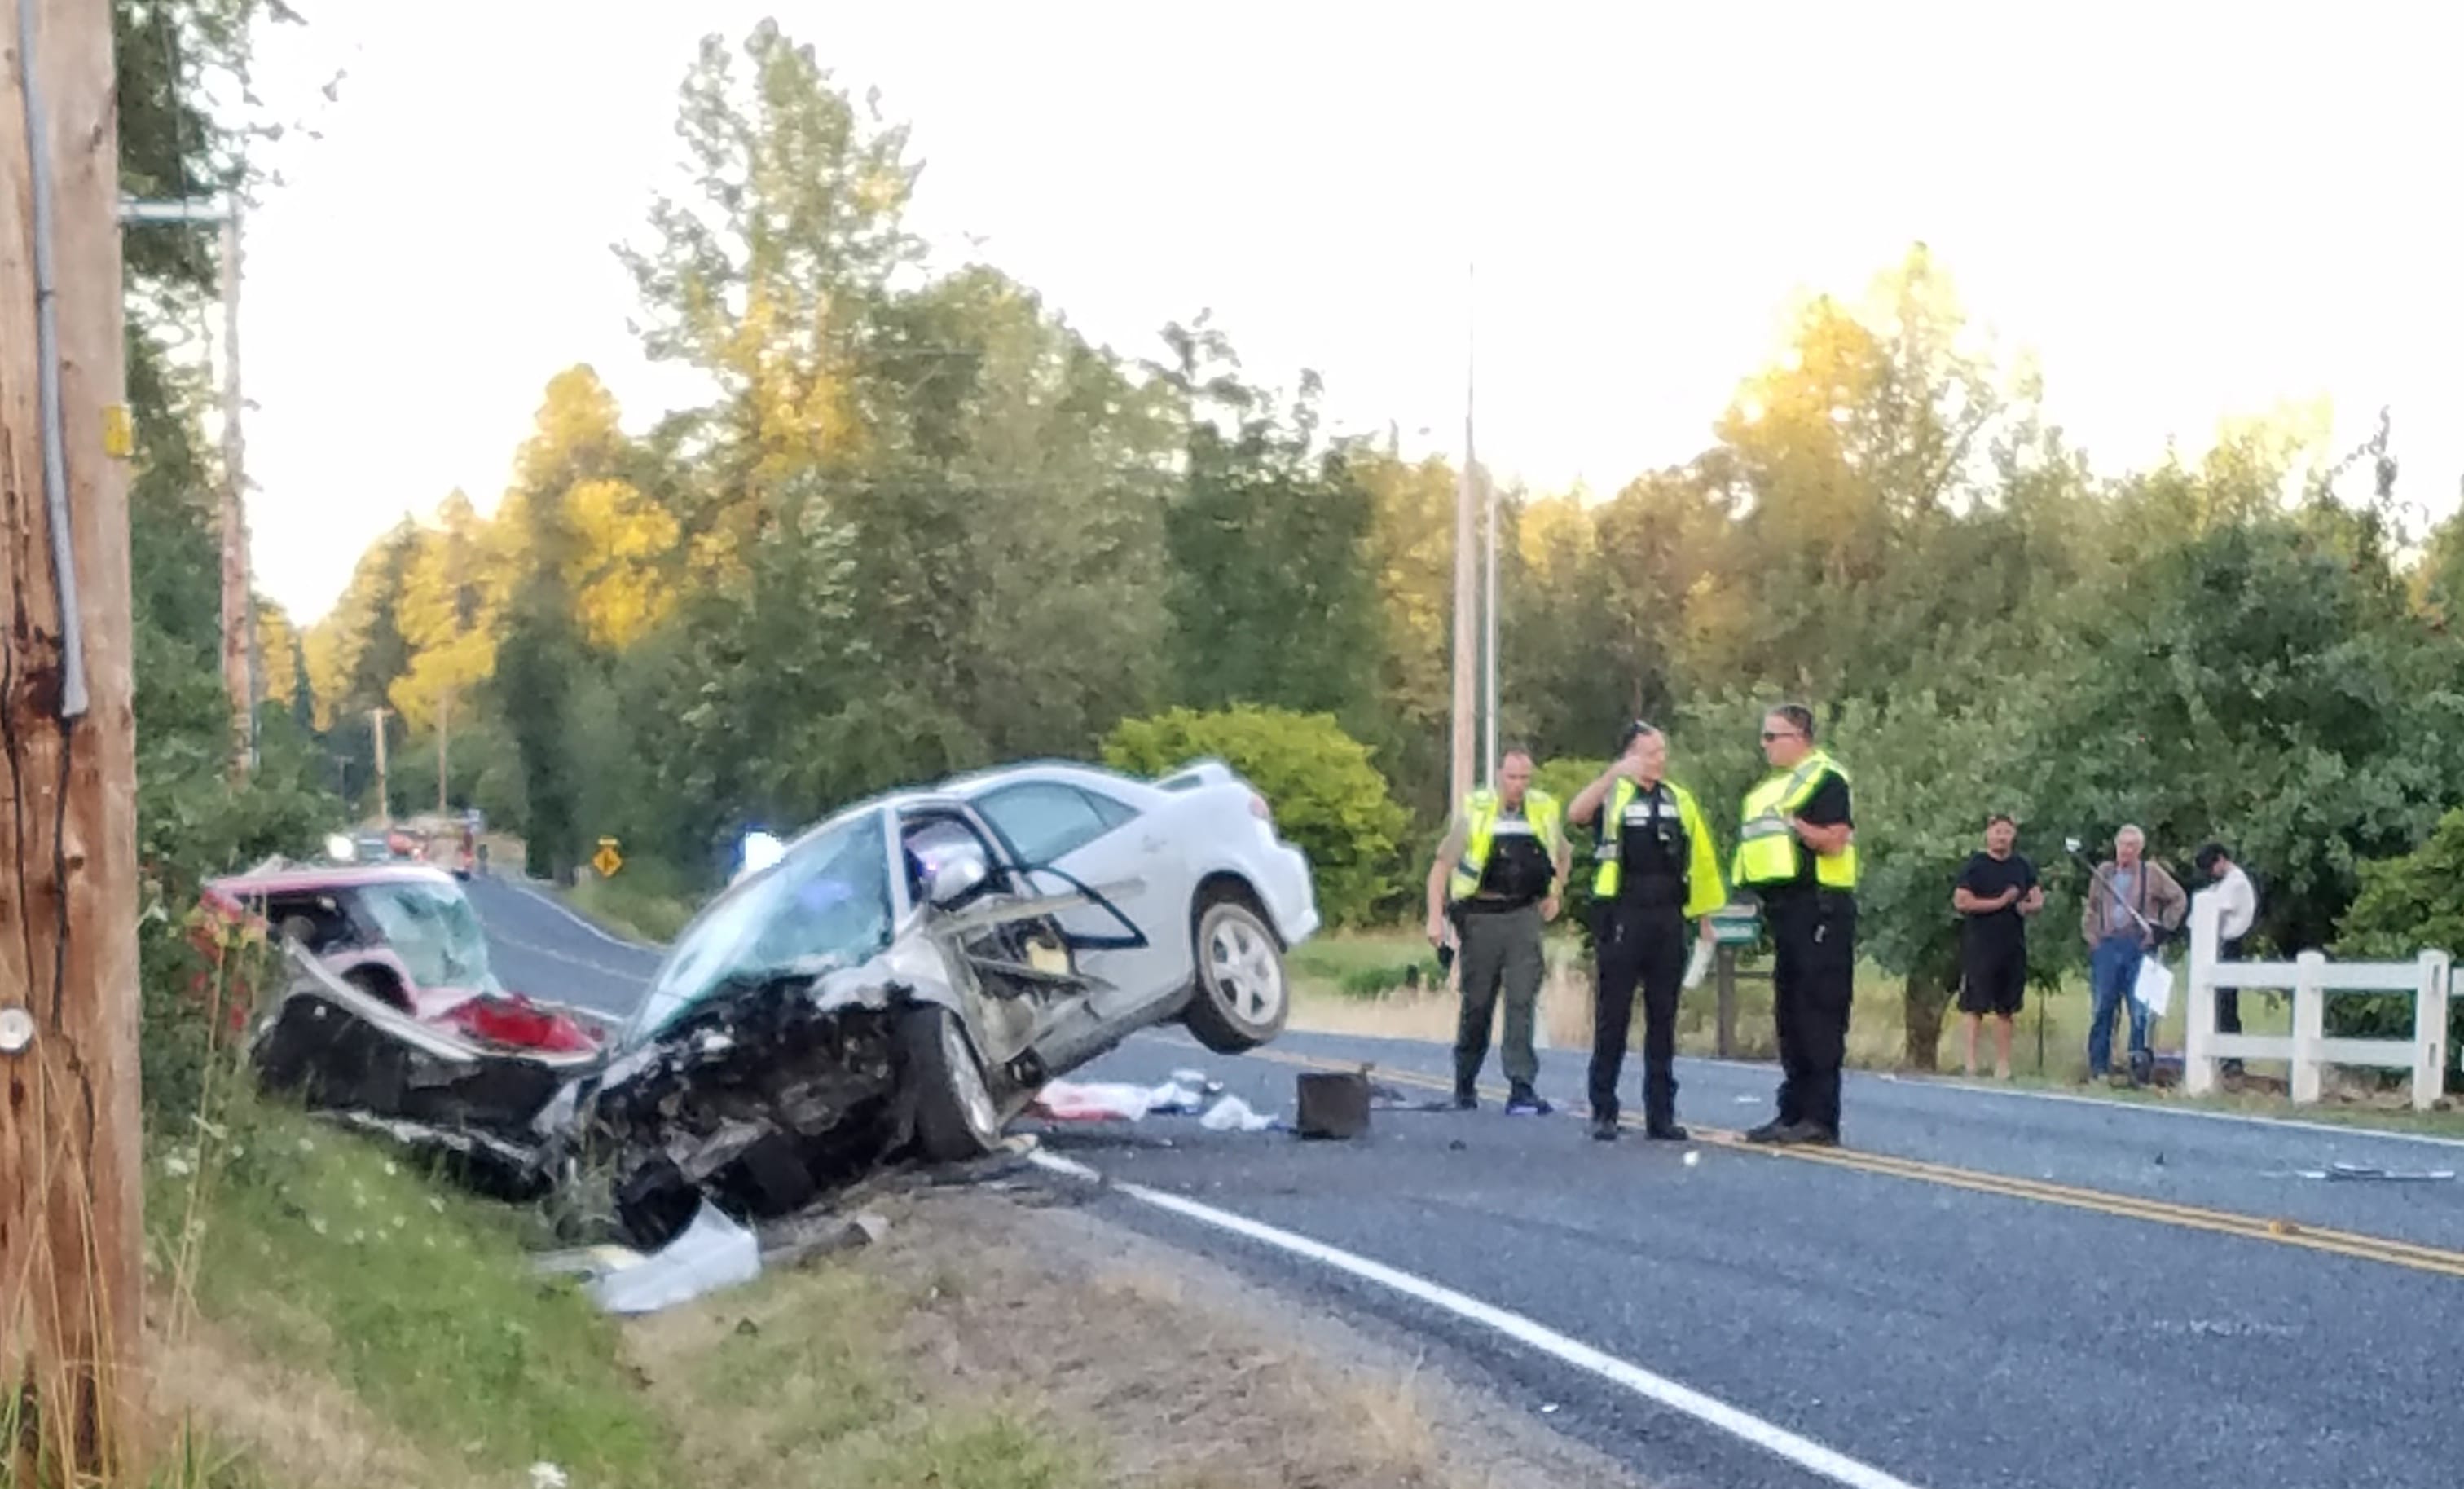 Deputies from the Clark County Sheriff's Department investigate a head-on crash in the 4400 block of Northeast 259th Street on Saturday.